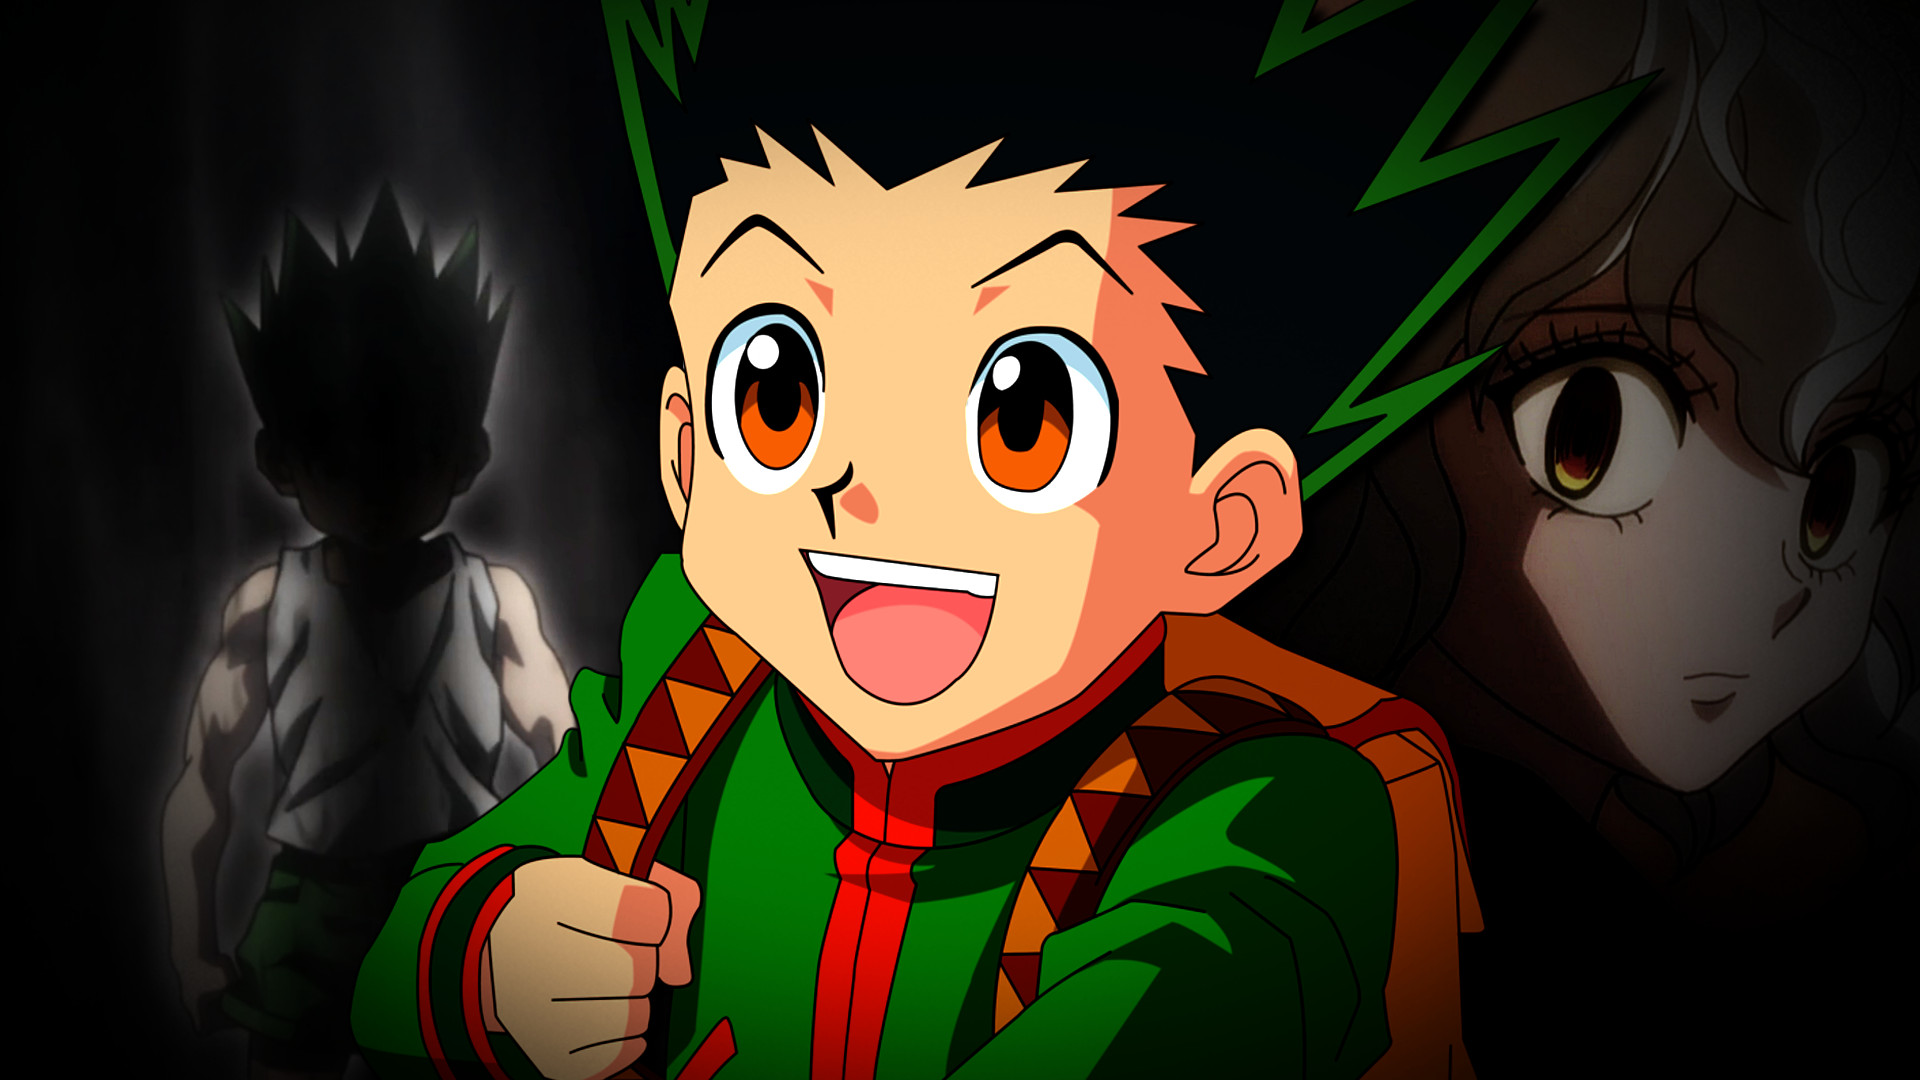 Gon Vector by Neighthirst on DeviantArt  Hunter anime Hunter x hunter Anime  characters